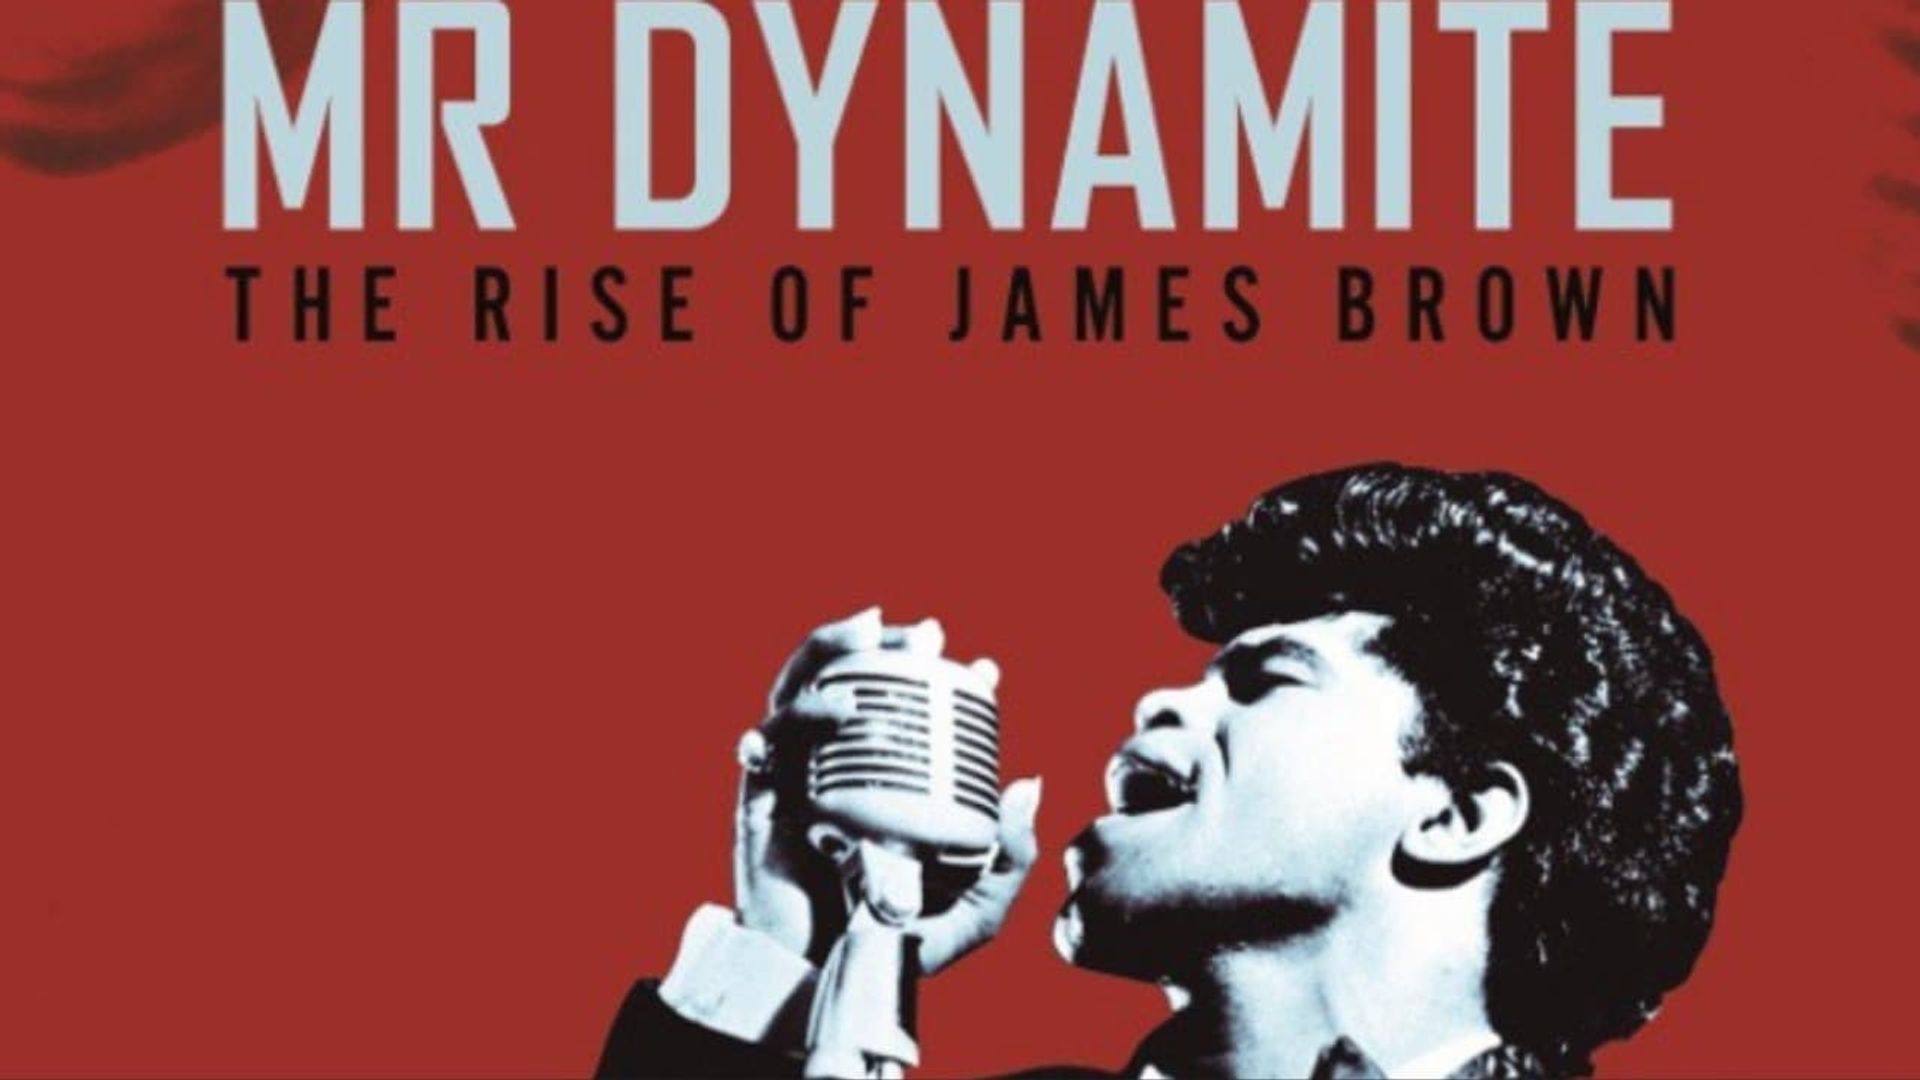 Mr. Dynamite: The Rise of James Brown background